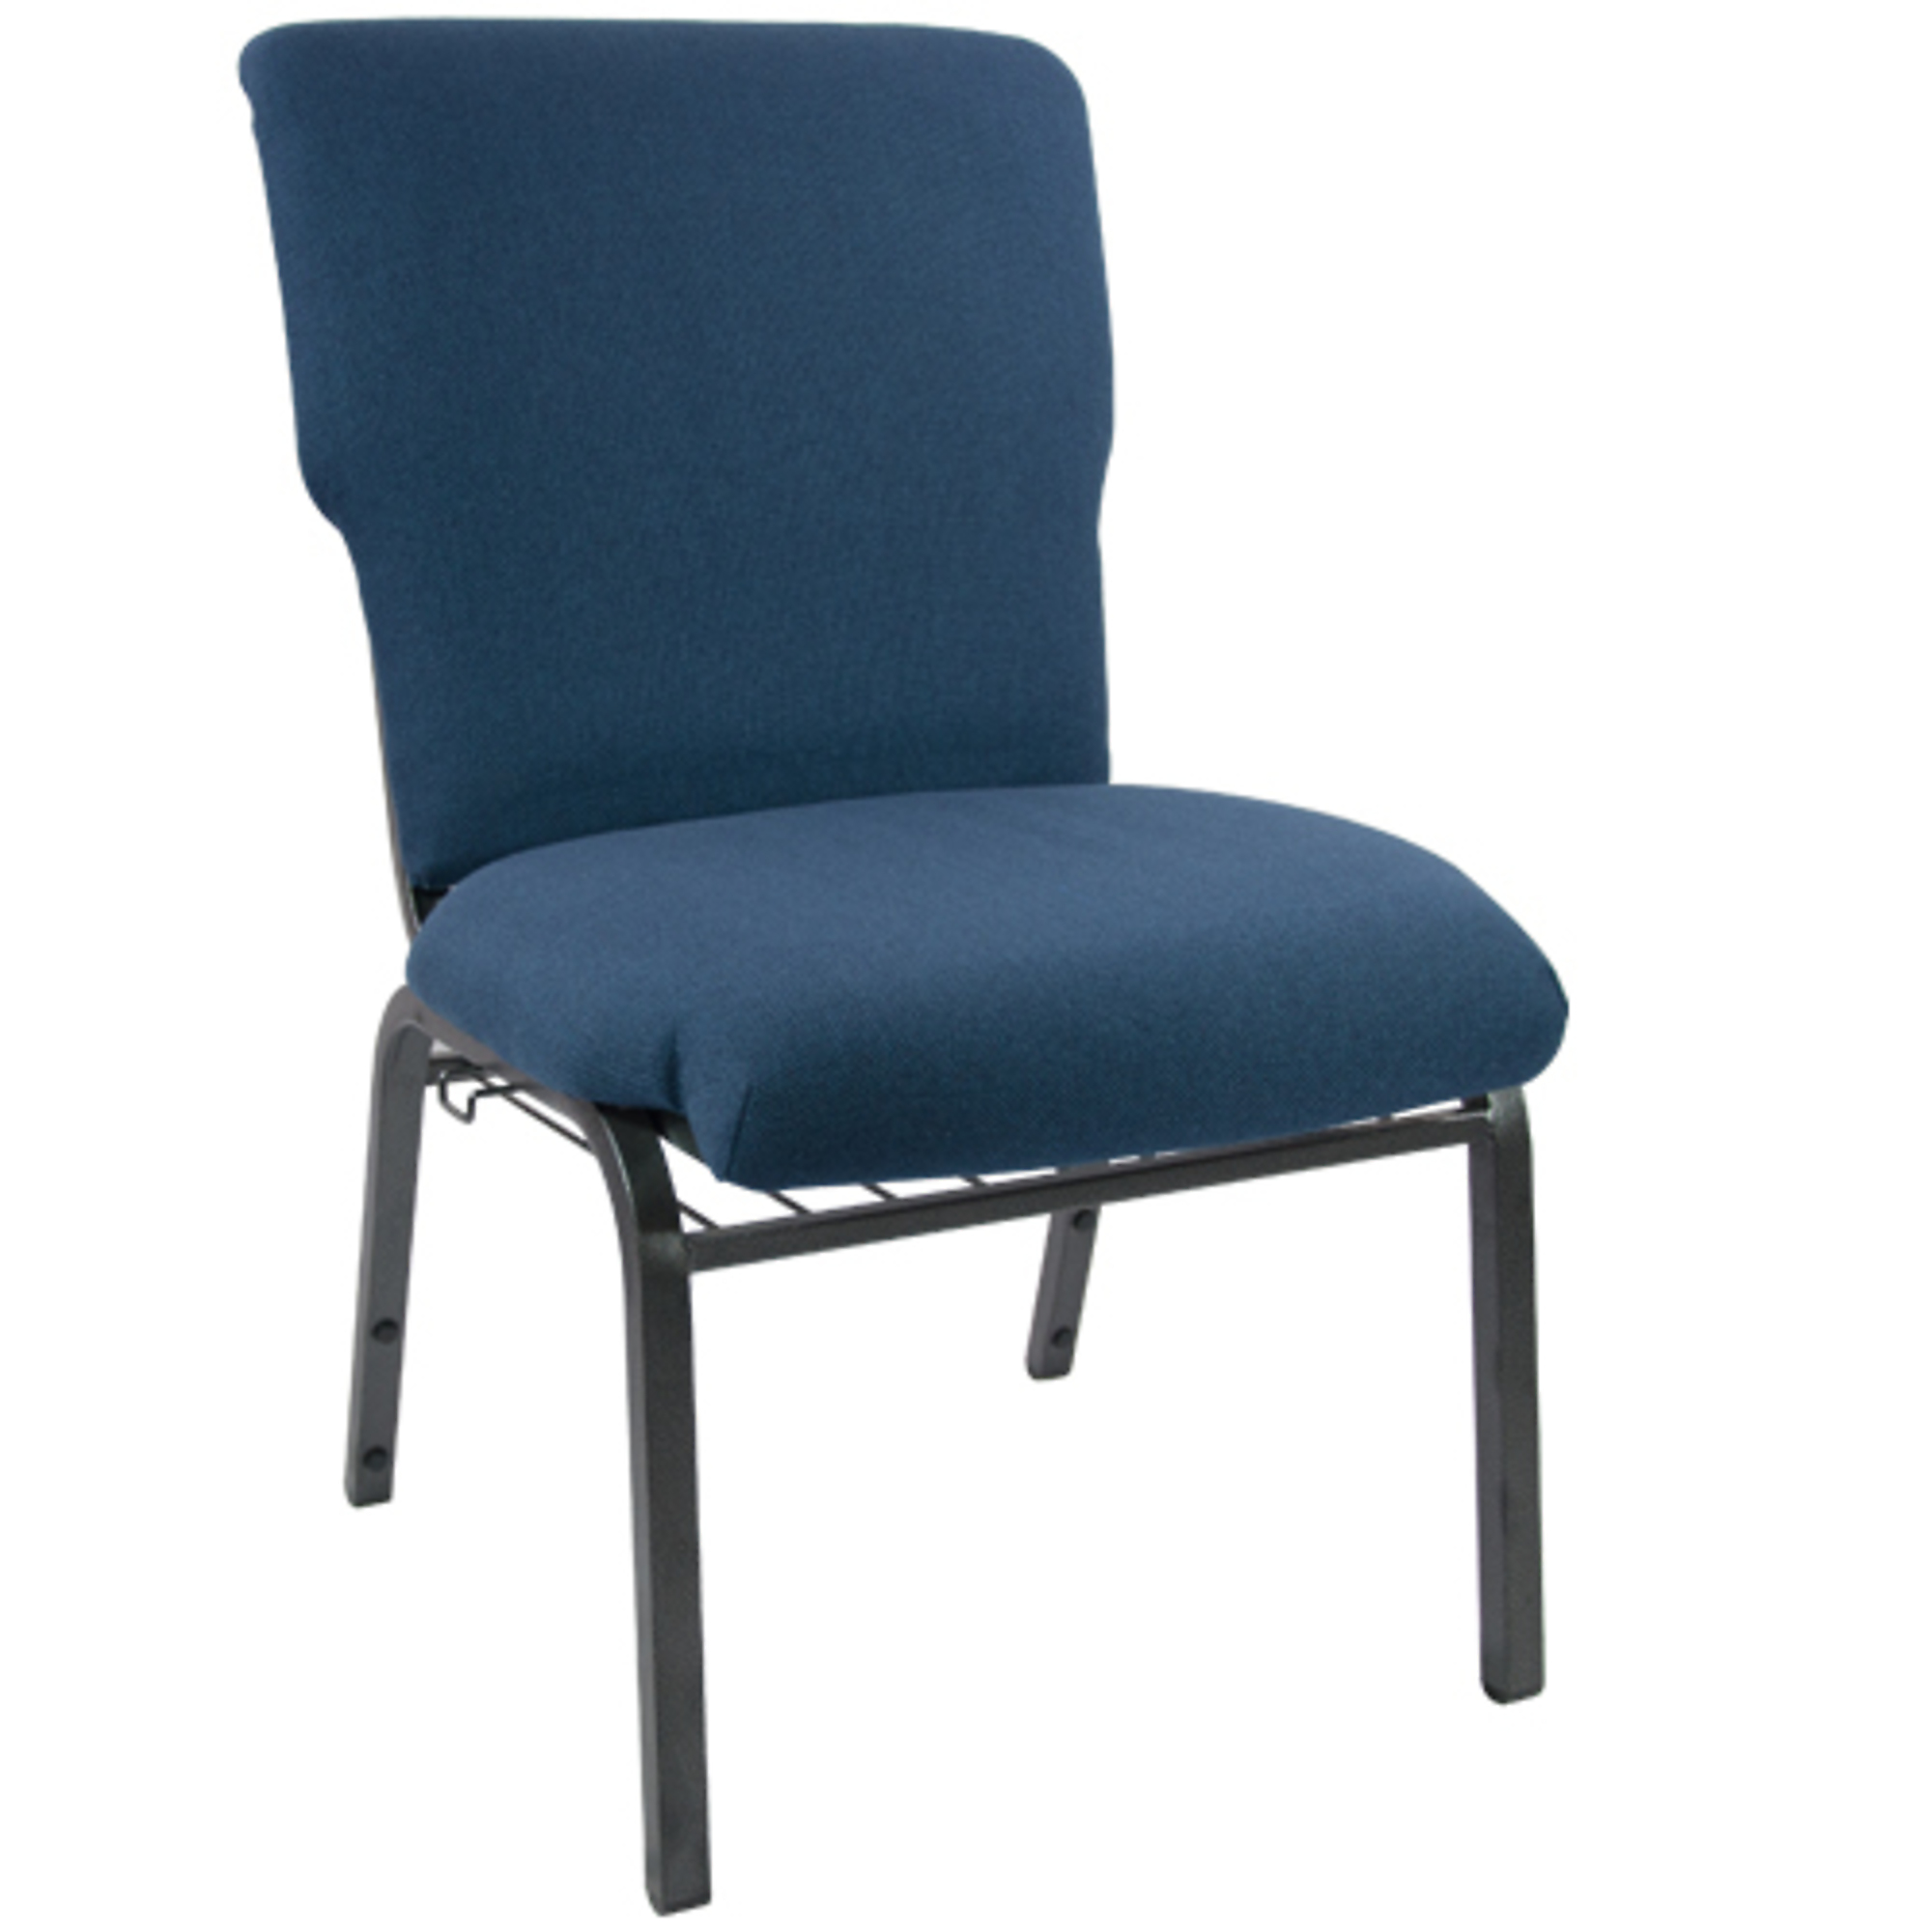 Flash Furniture, Navy Discount Church Chair - 21Inch Wide, Primary Color Blue, Included (qty.) 1, Model EPCHT101